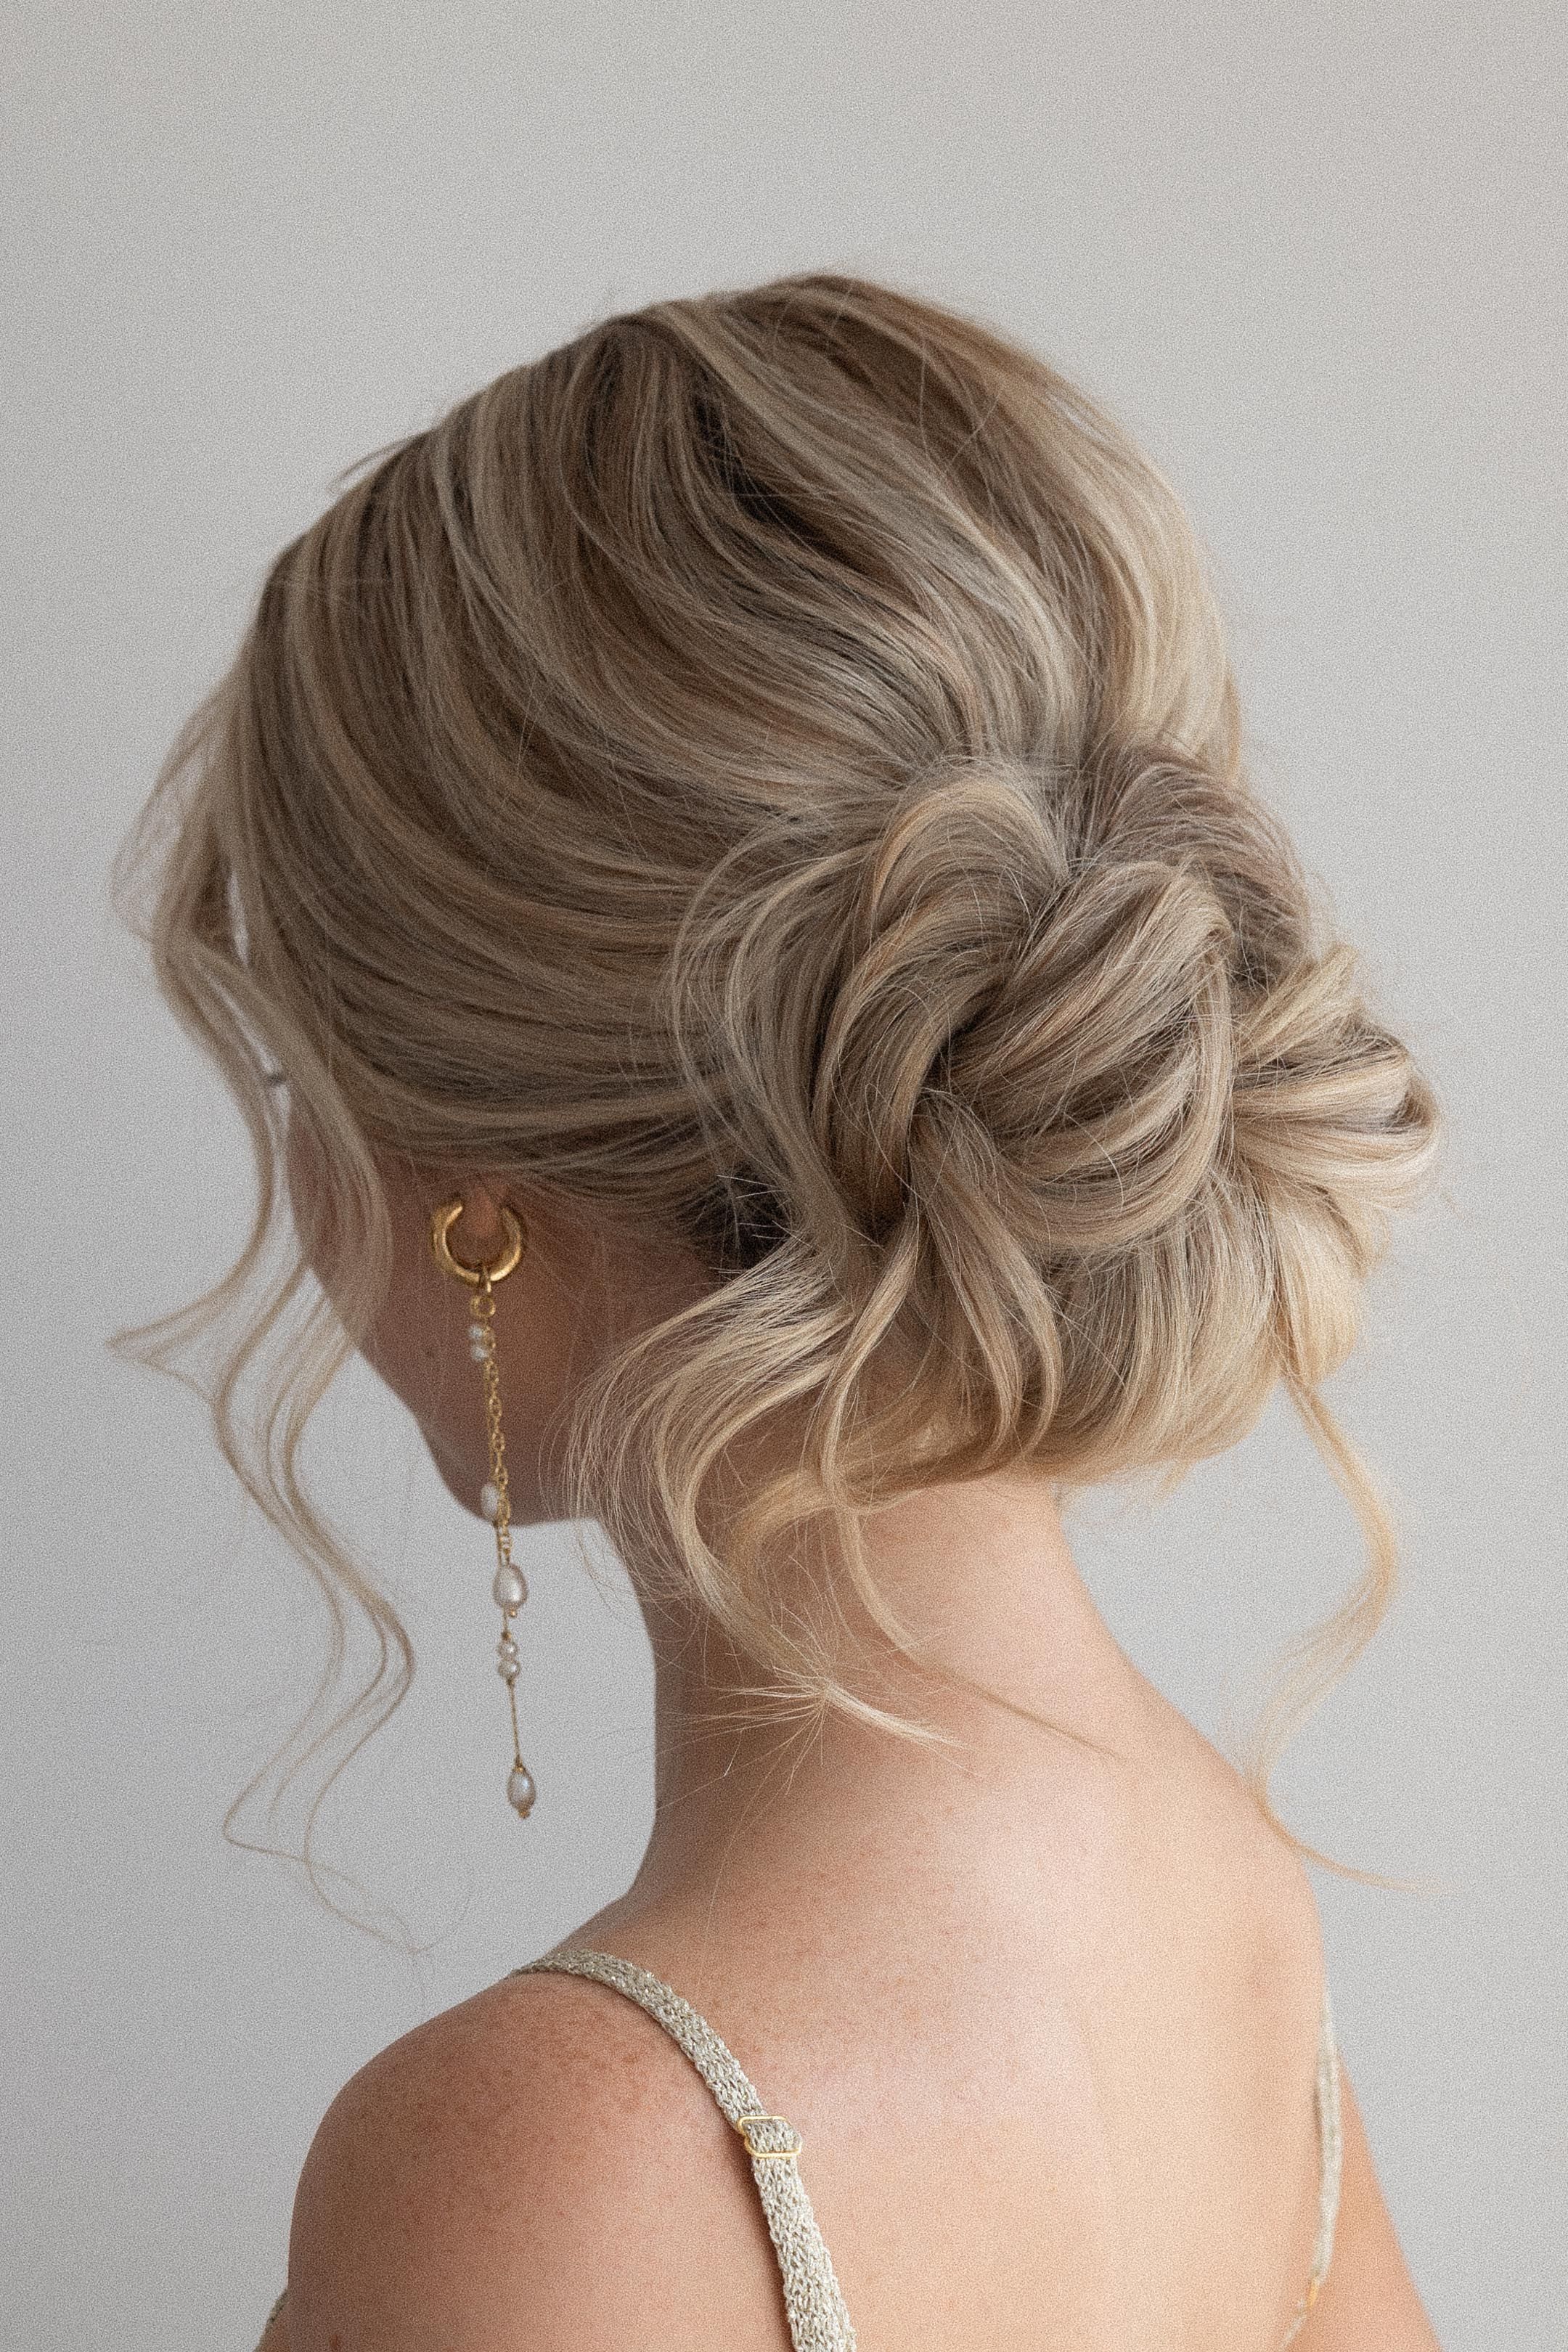 Easy Updo Wedding Hairstyle For Long Hair – Alex Gaboury With Regard To Bridesmaid’s Updo For Long Hair (View 16 of 25)